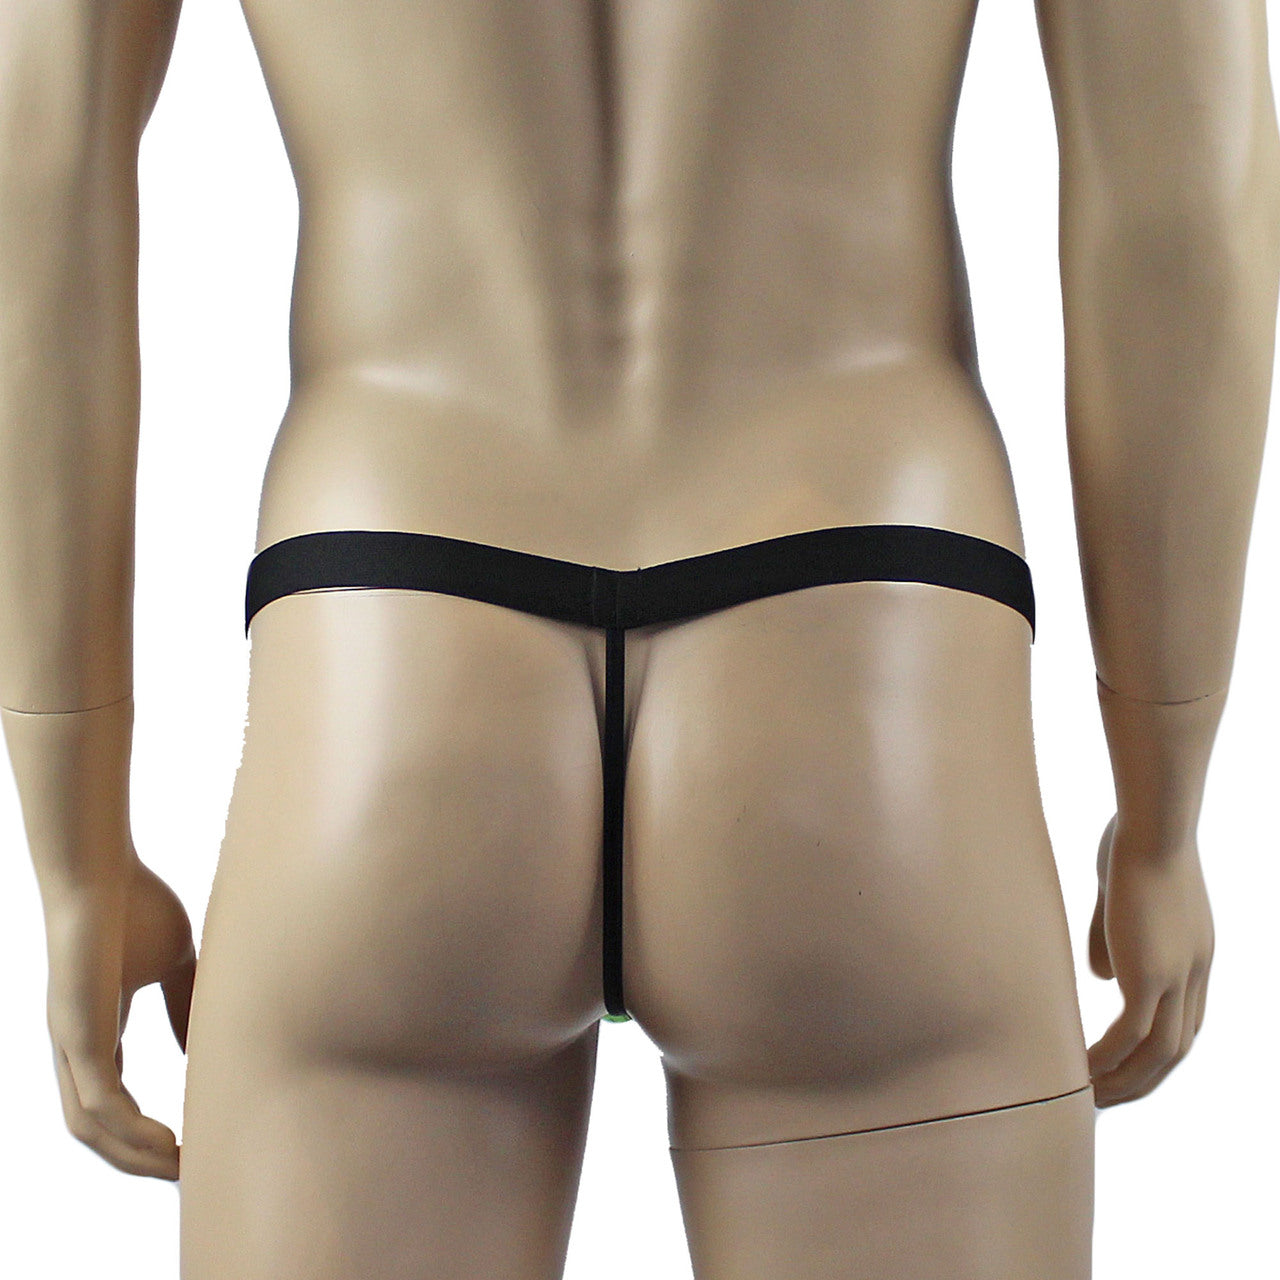 Mens Spider Web G string Thong with Band Lime Green